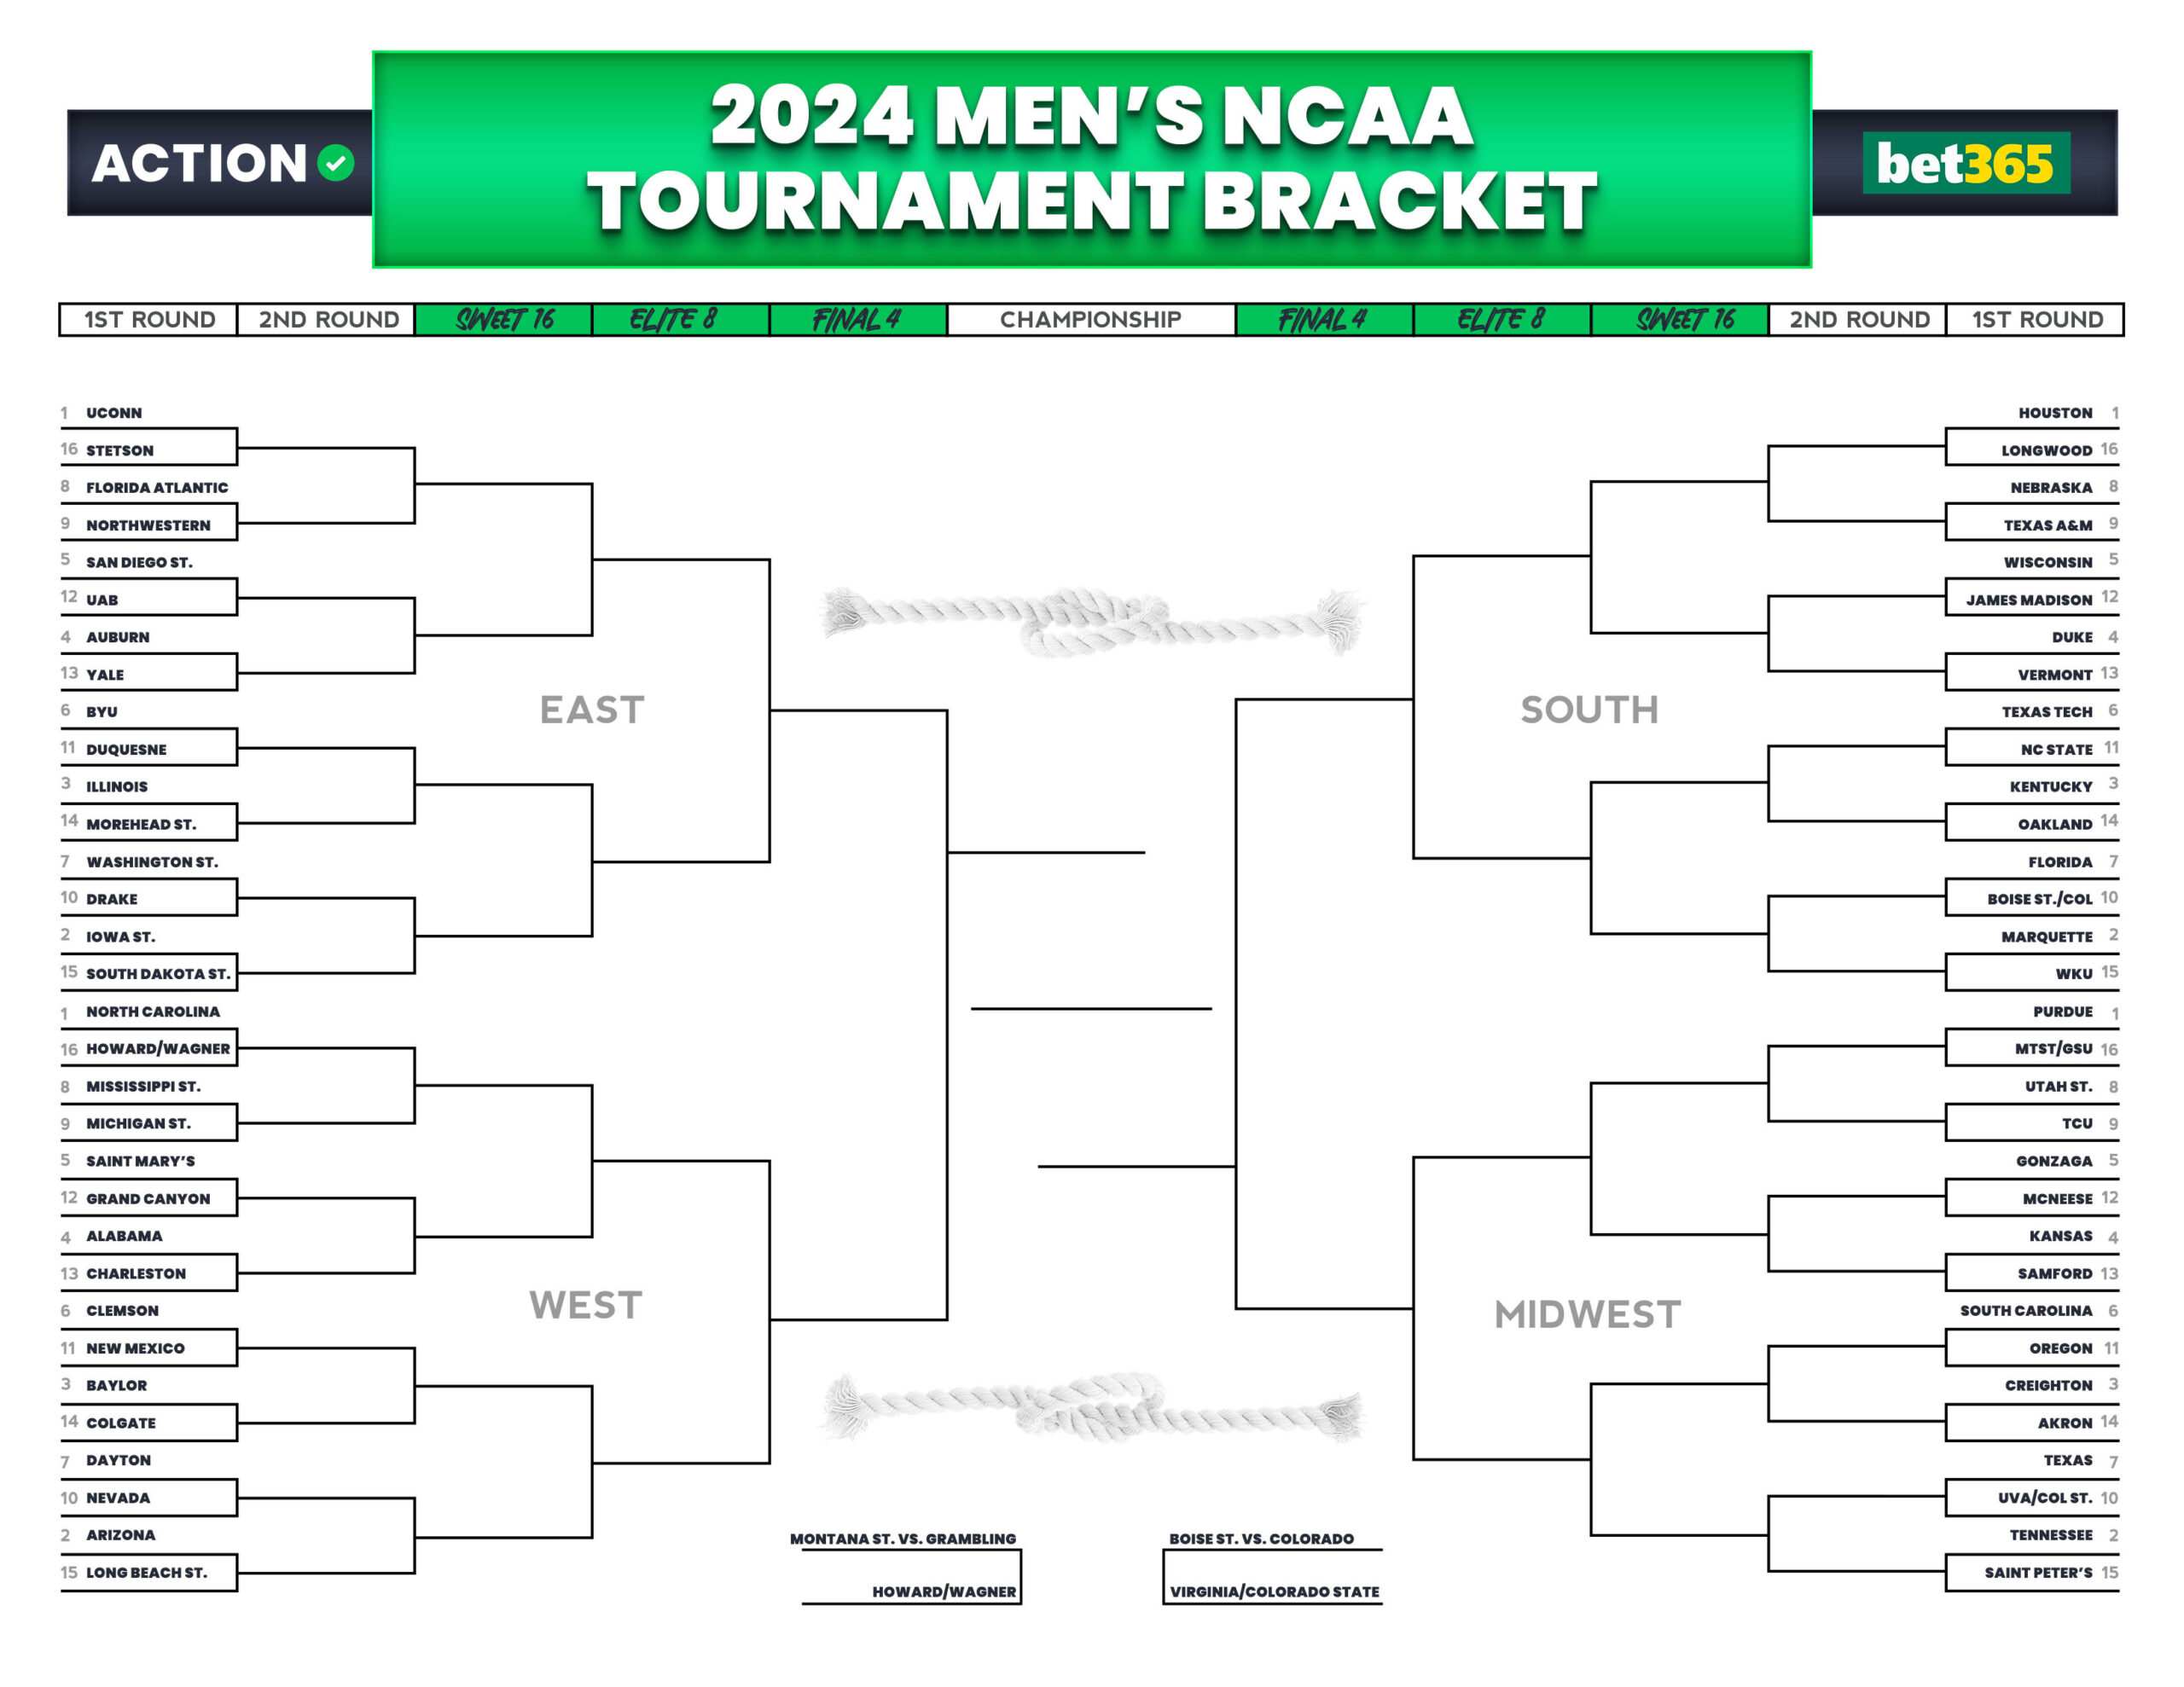 Photo: march madness odds for each game